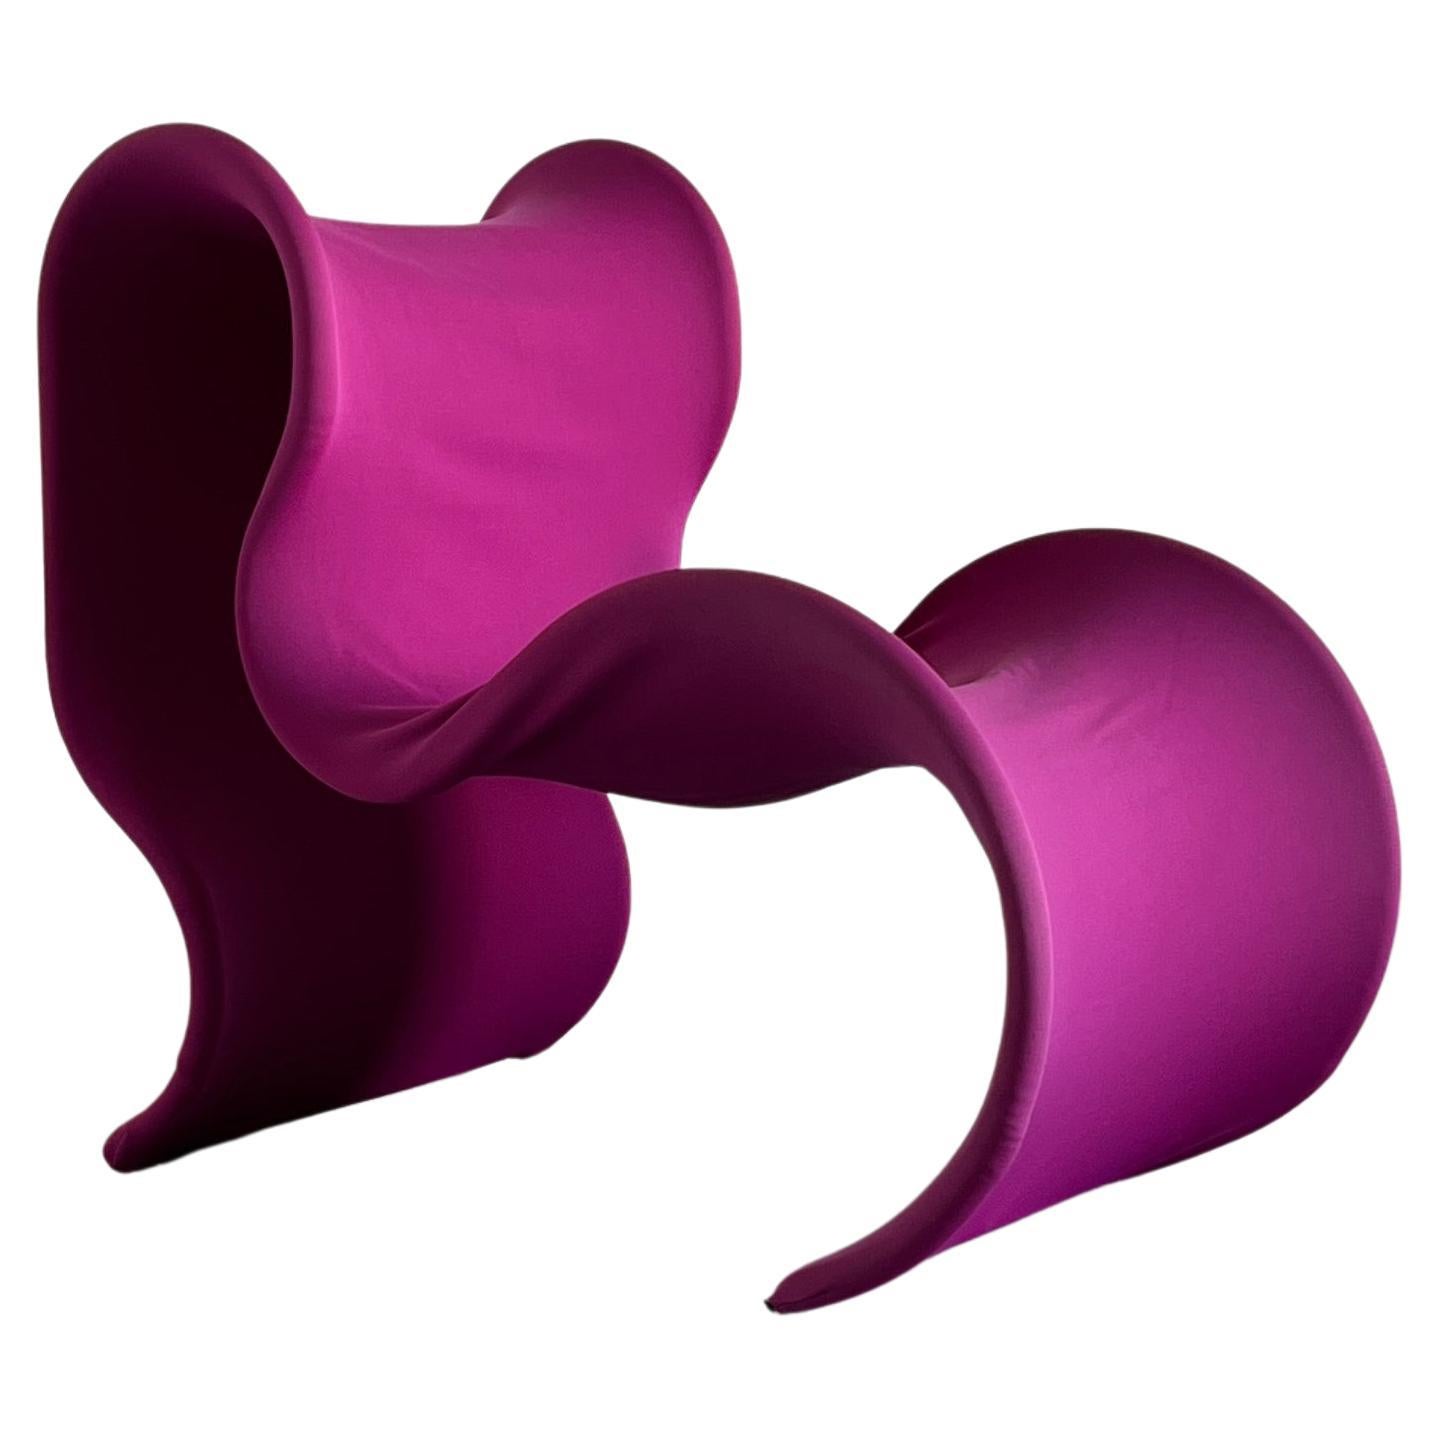 Large Fiocco Armchair by Gianni Pareschi for Busnelli in Pink, 1970s For Sale